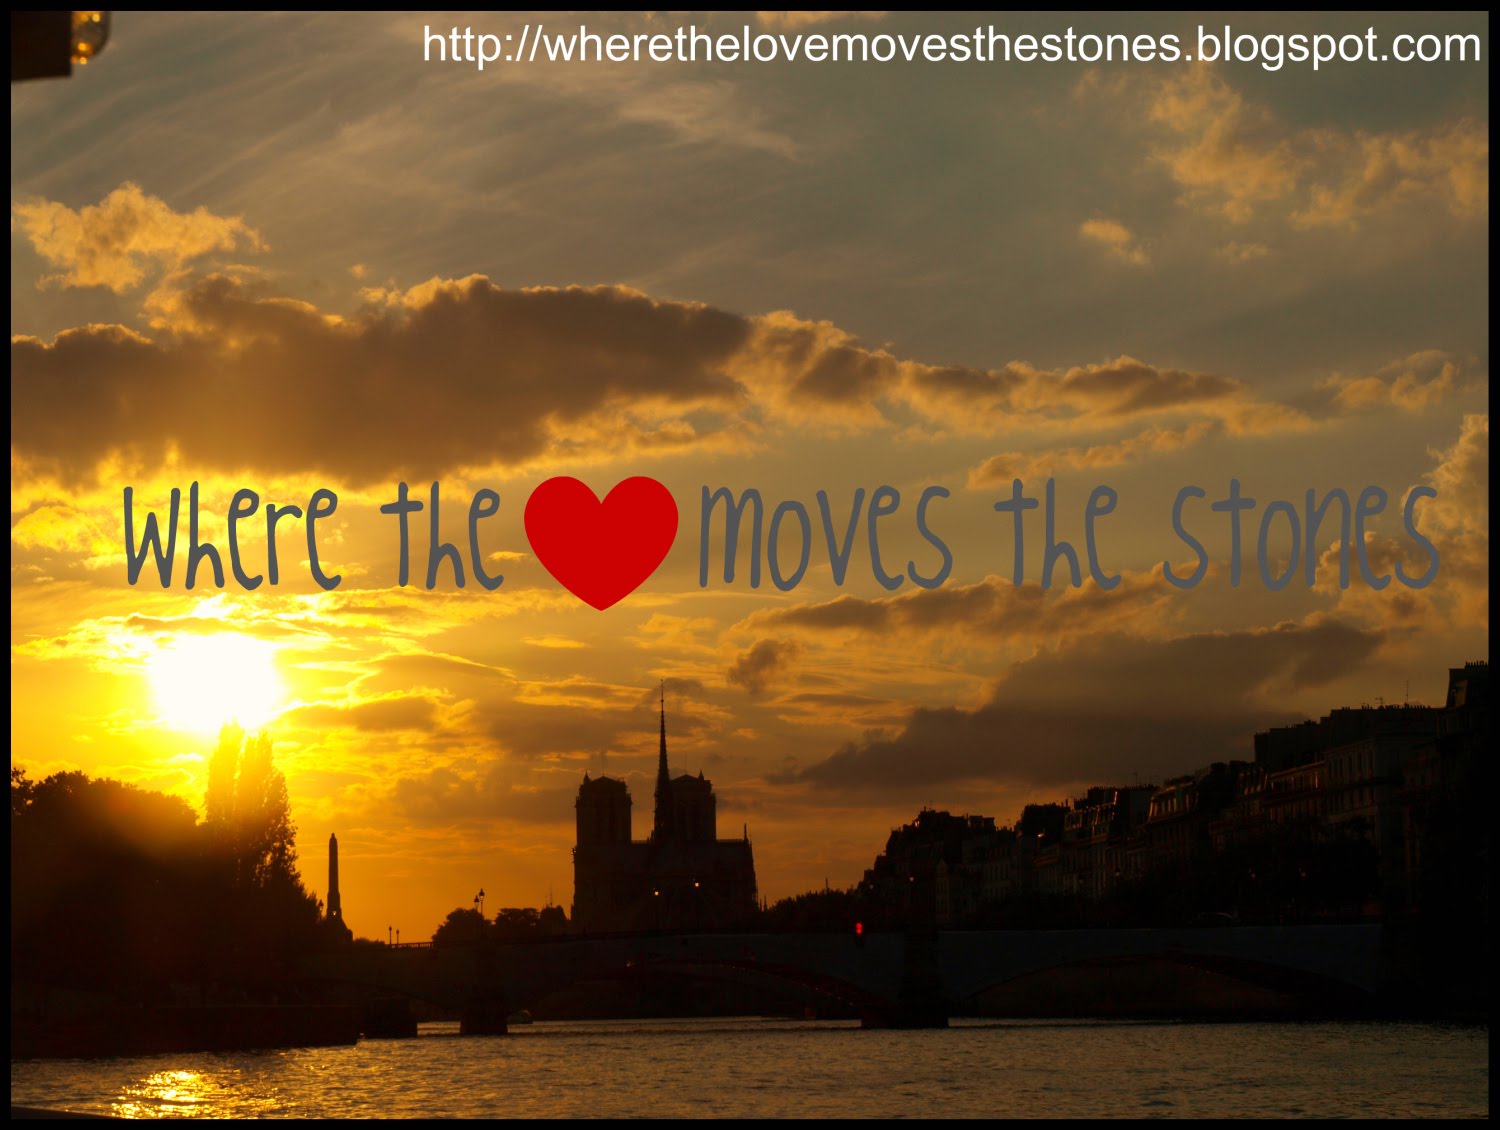 where the ♥ moves the stones